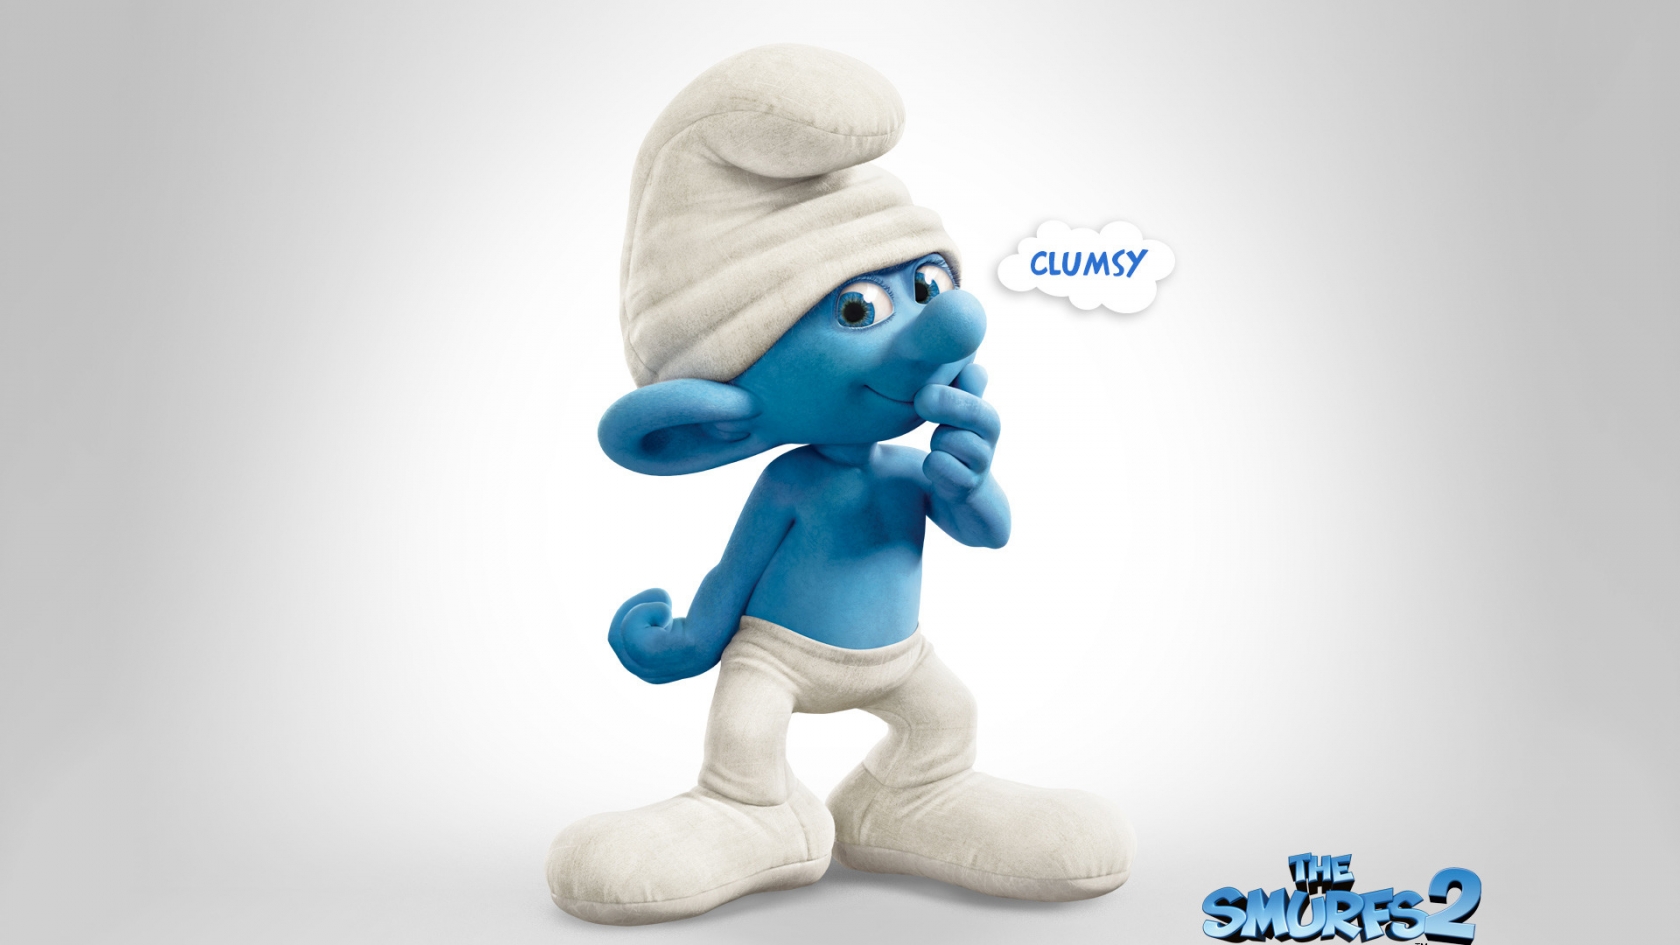 Clumsy The Smurfs 2 for 1680 x 945 HDTV resolution